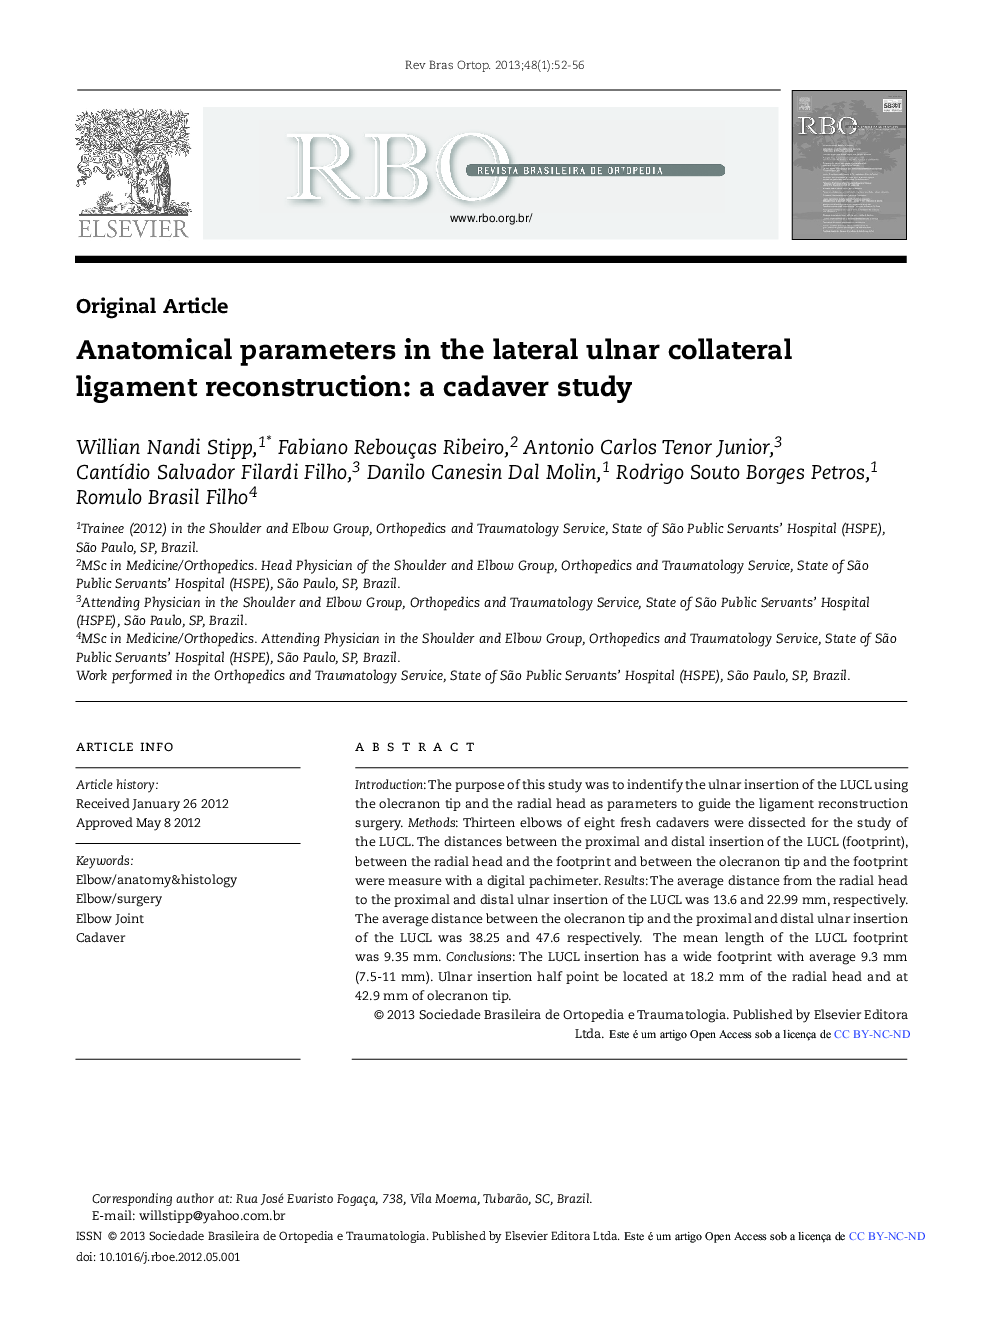 Anatomical parameters in the lateral ulnar collateral ligament reconstruction: a cadaver study *